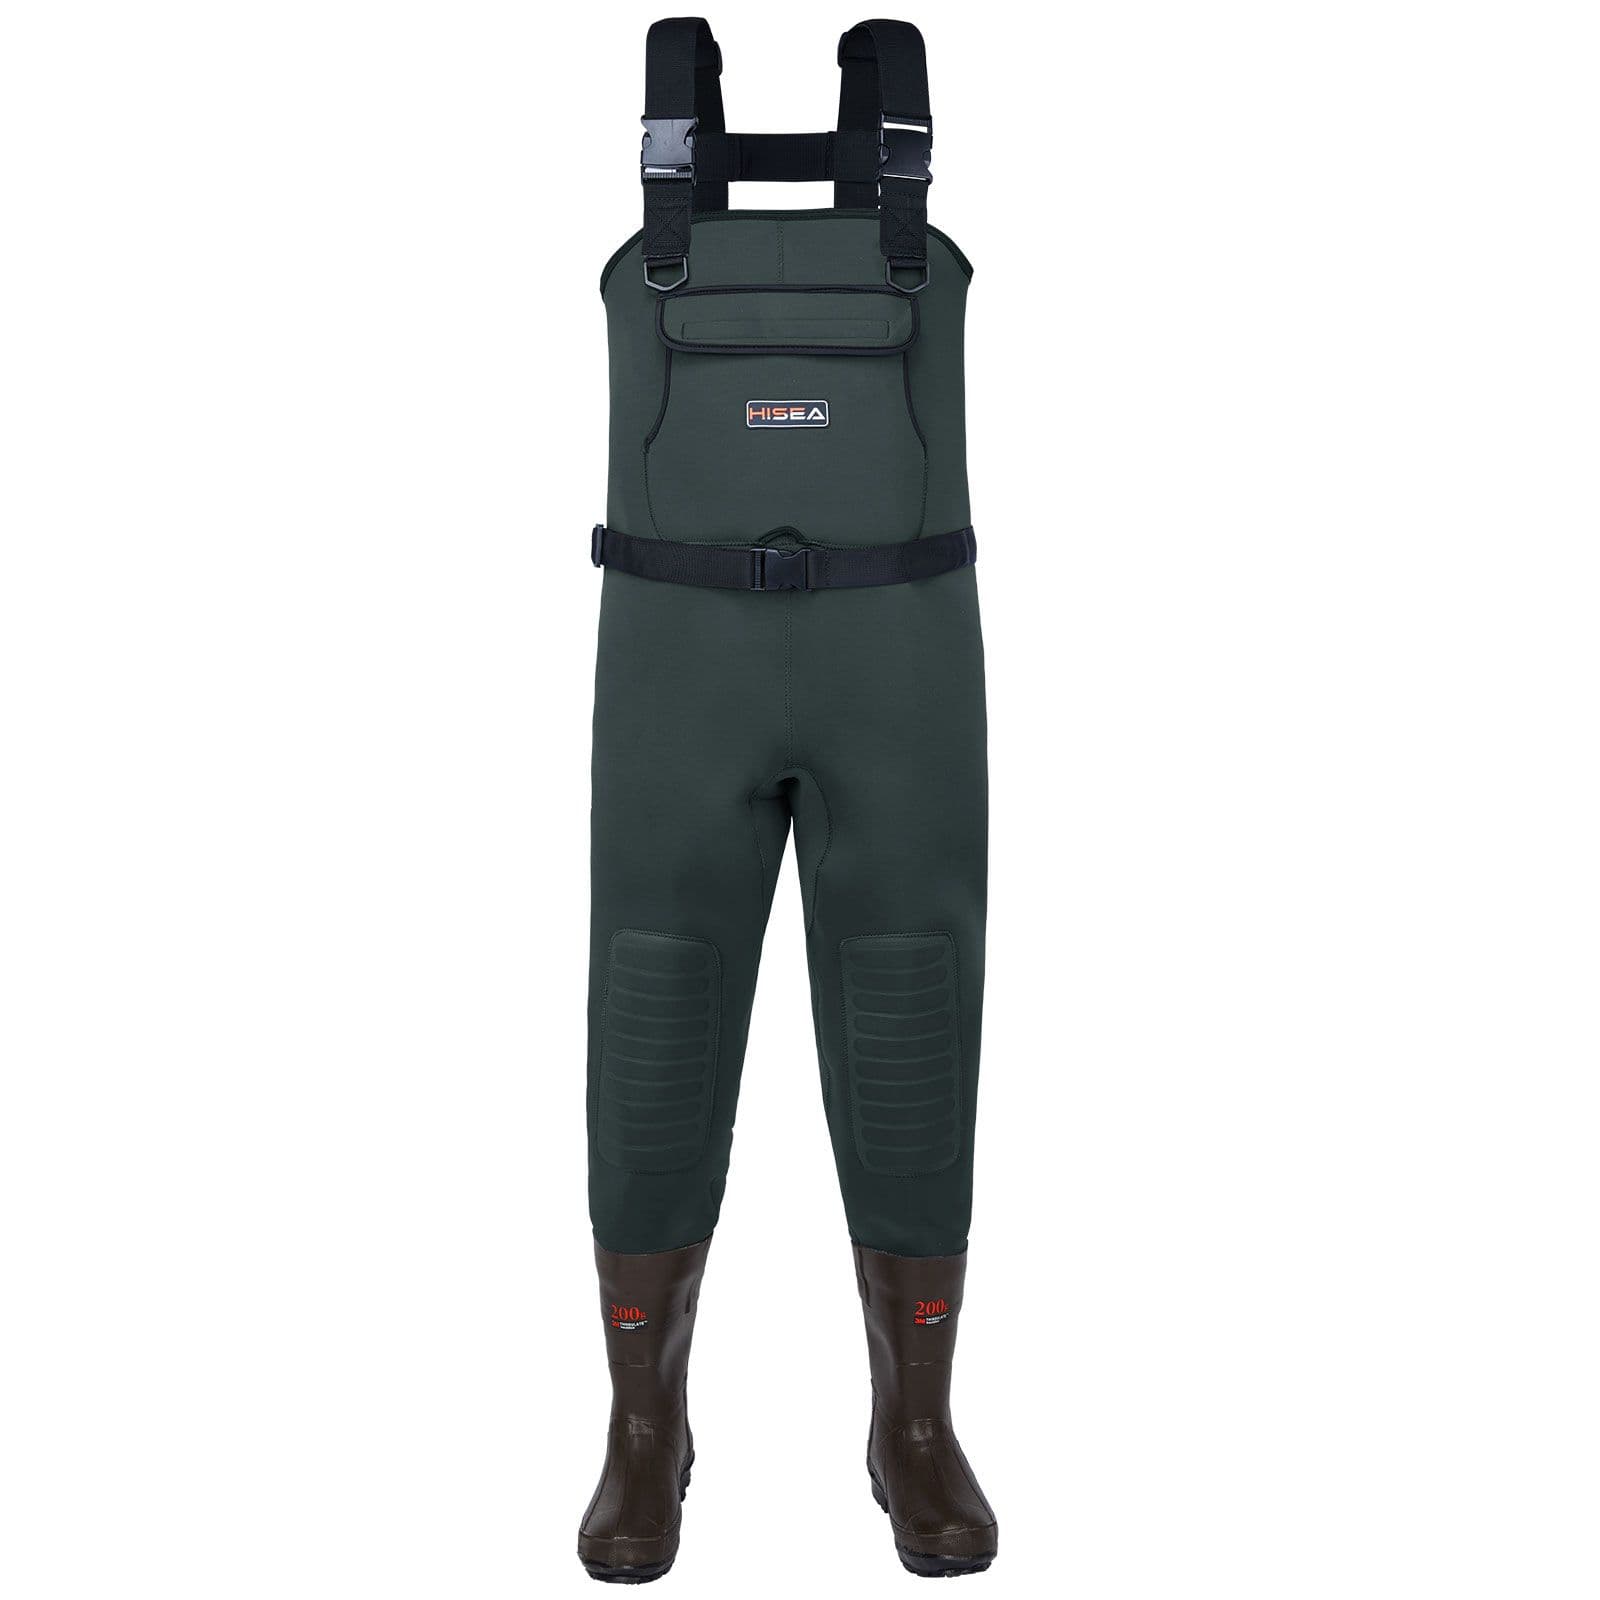 TideWe Chest Waders, Hunting Waders for Men Next Camo Evo with